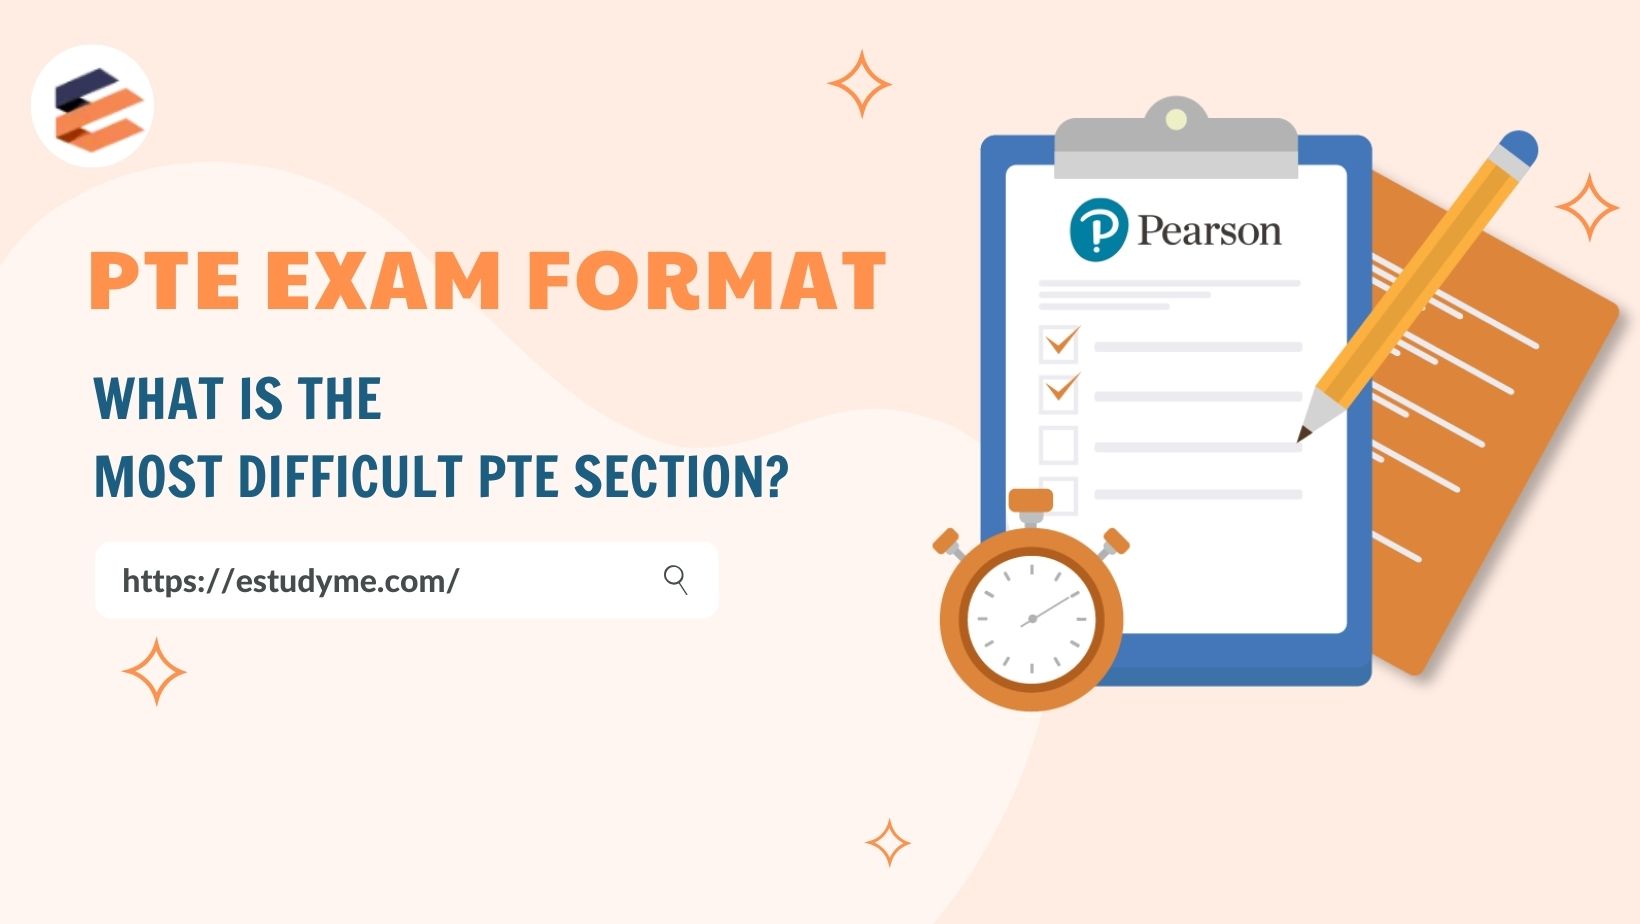 PTE Exam Format - What is the most difficult PTE section?